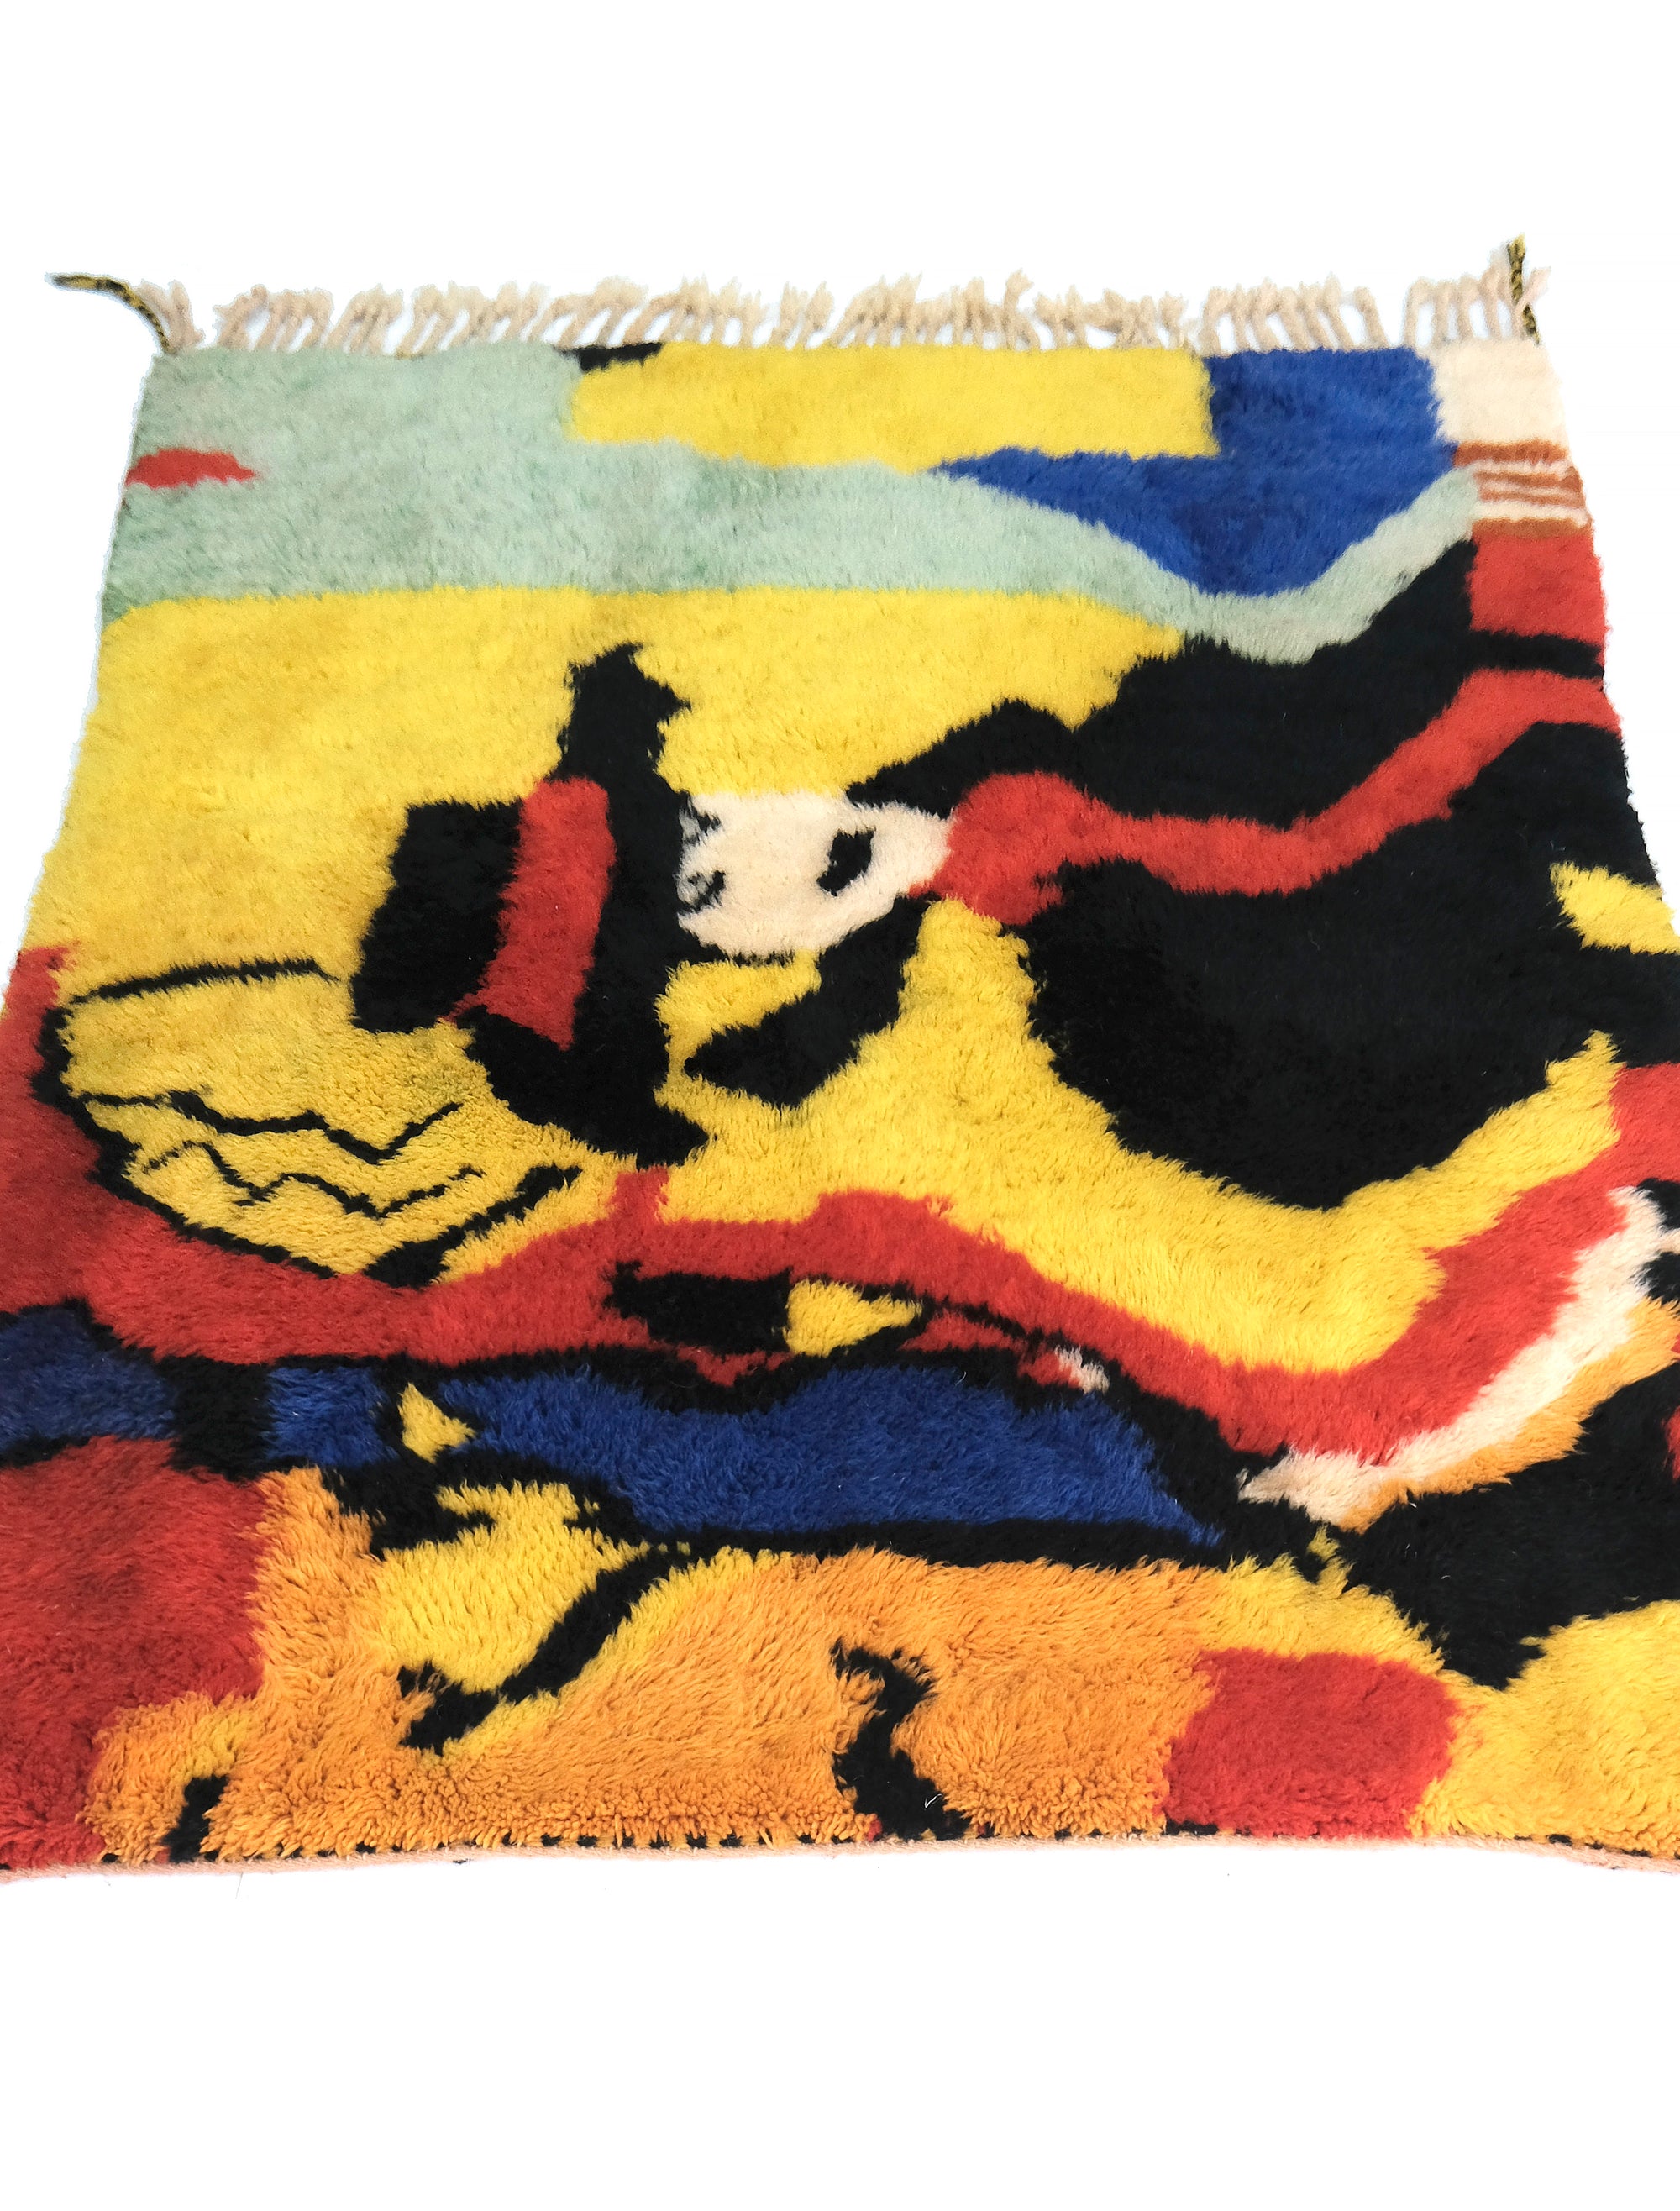 Elevate your space with our 'Vogue Revival Art Rug,' a vibrant homage to Irving Penn's iconic black and white Vogue cover. Infused with hues of red, yellow, green, and a touch of blue reminiscent of 80s web aesthetics, this rug captures both fashion history and artistic innovation. Channeling the energy of Penn's work, this multicolored masterpiece adds a dynamic touch to your decor, blending vintage charm with contemporary flair."